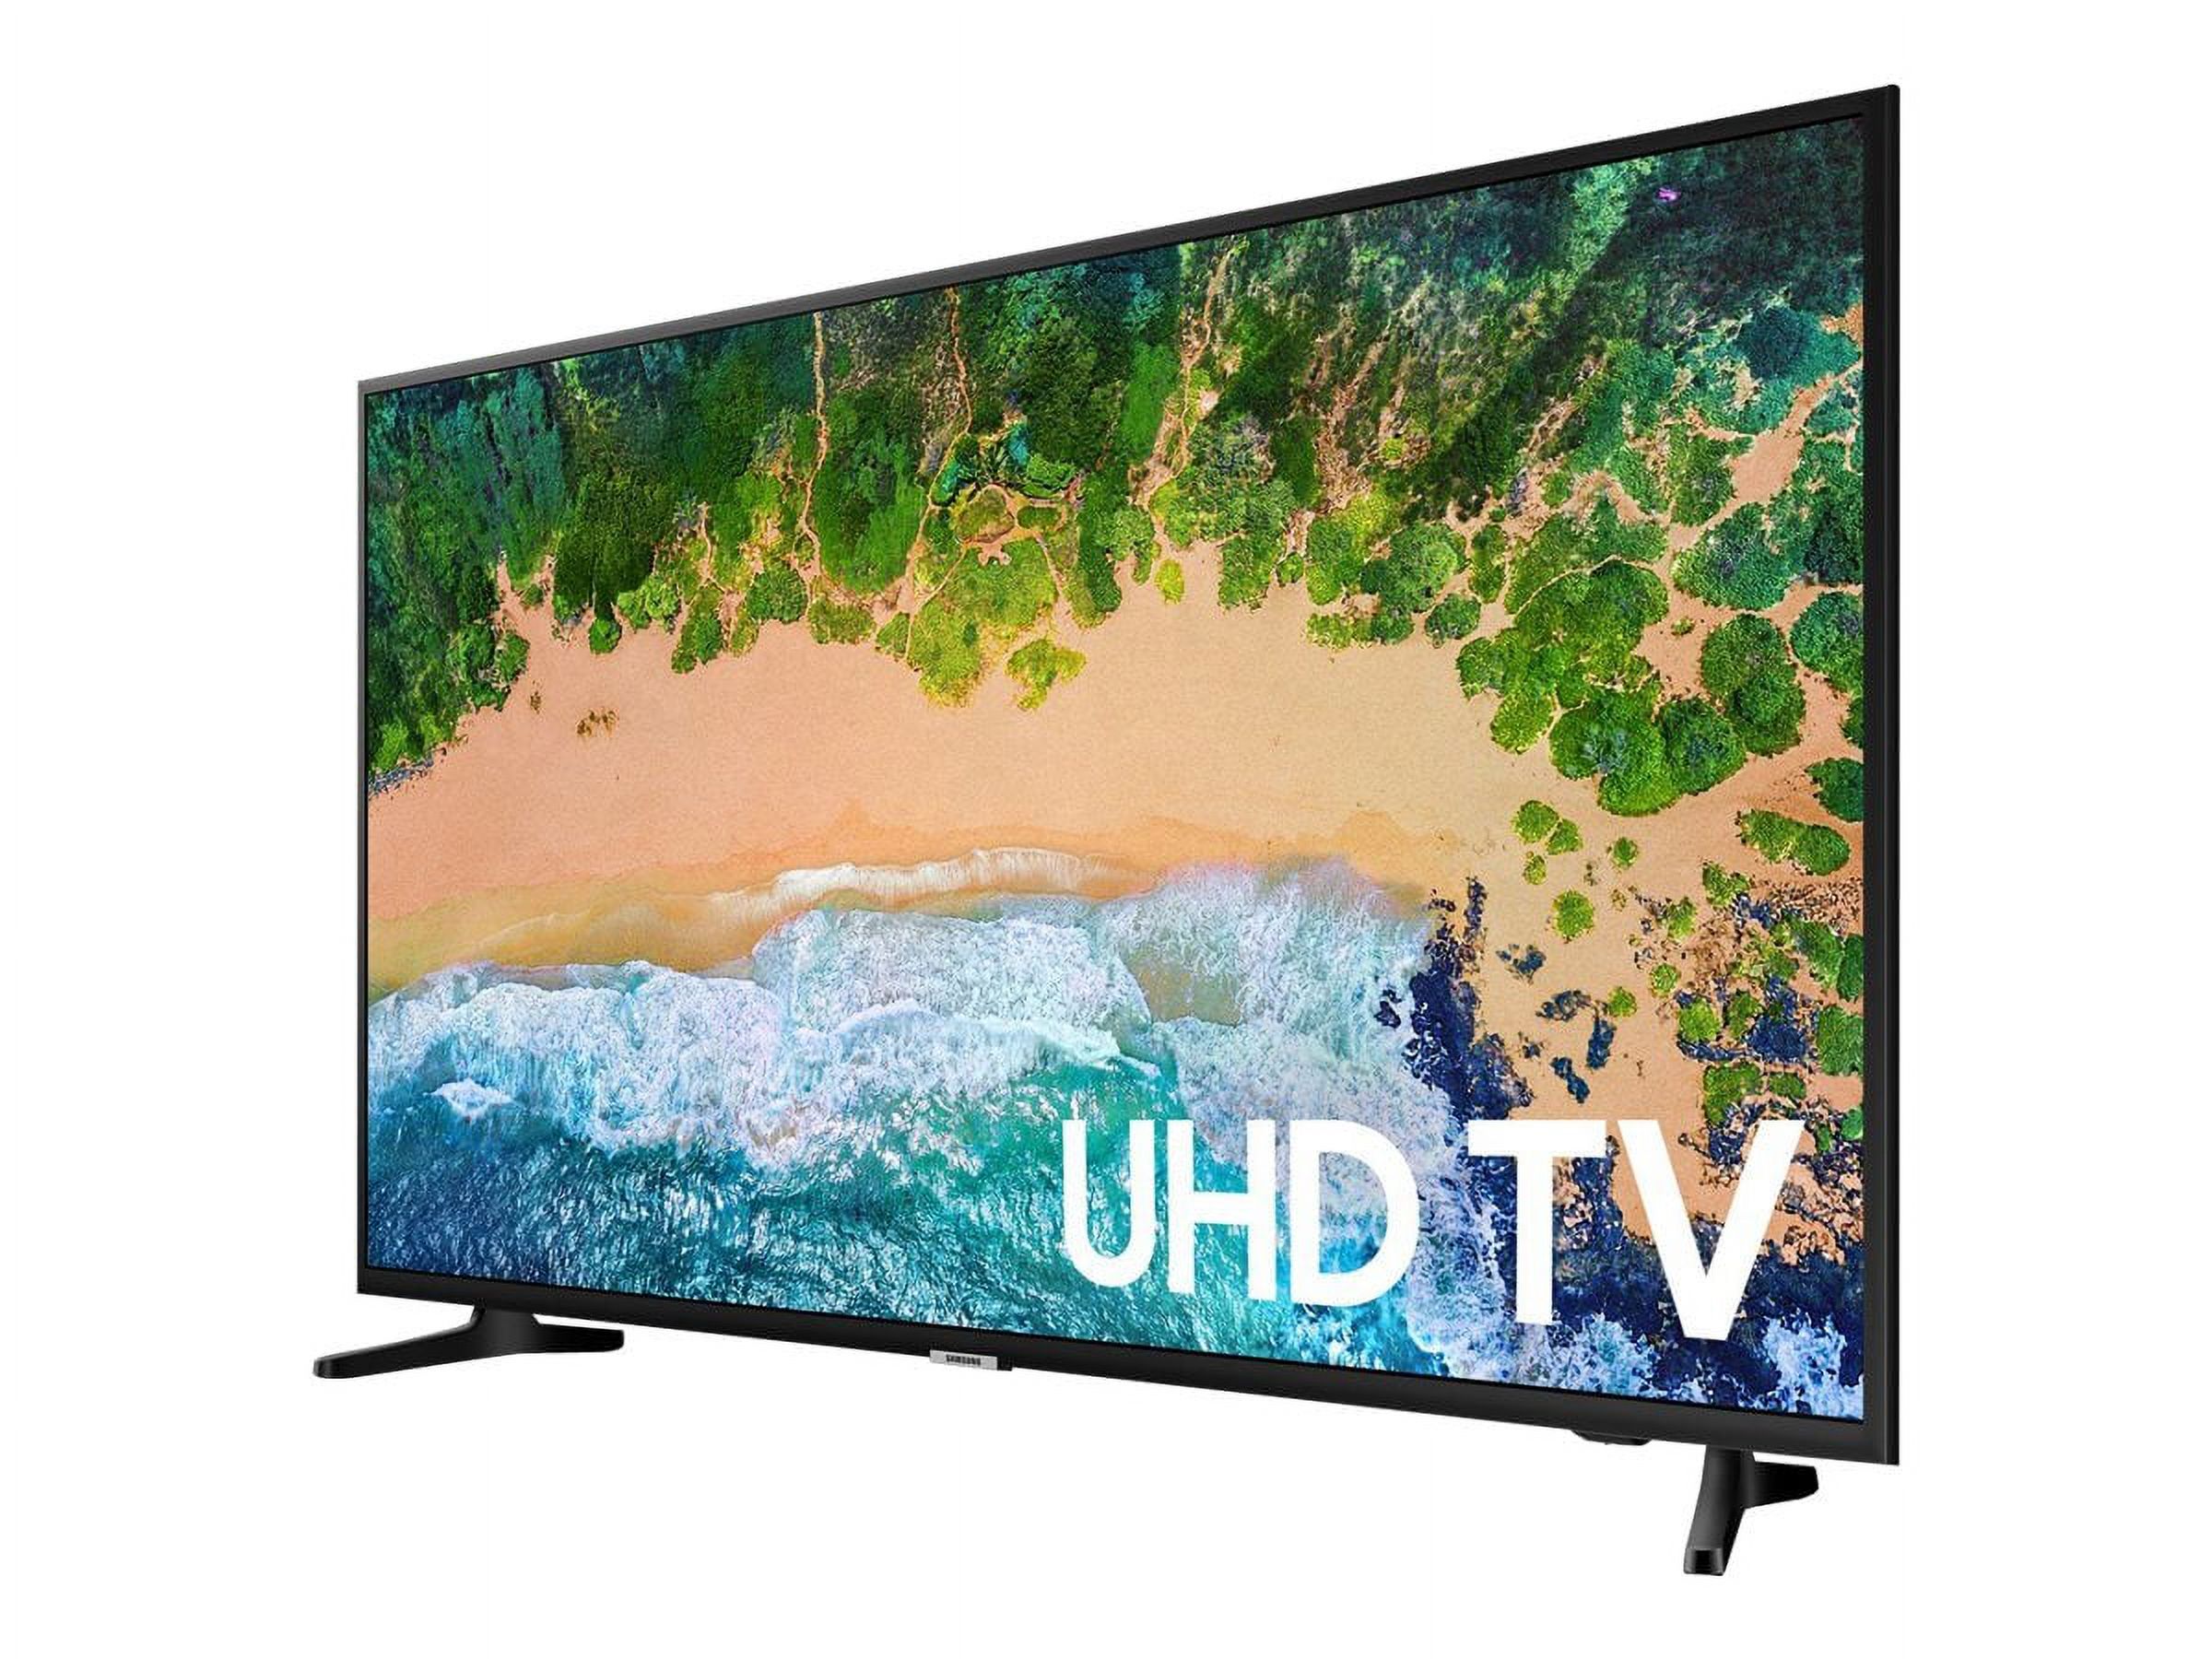 SAMSUNG 50" Class 4K UHD 2160p LED Smart TV with HDR UN50NU6900 - image 4 of 6